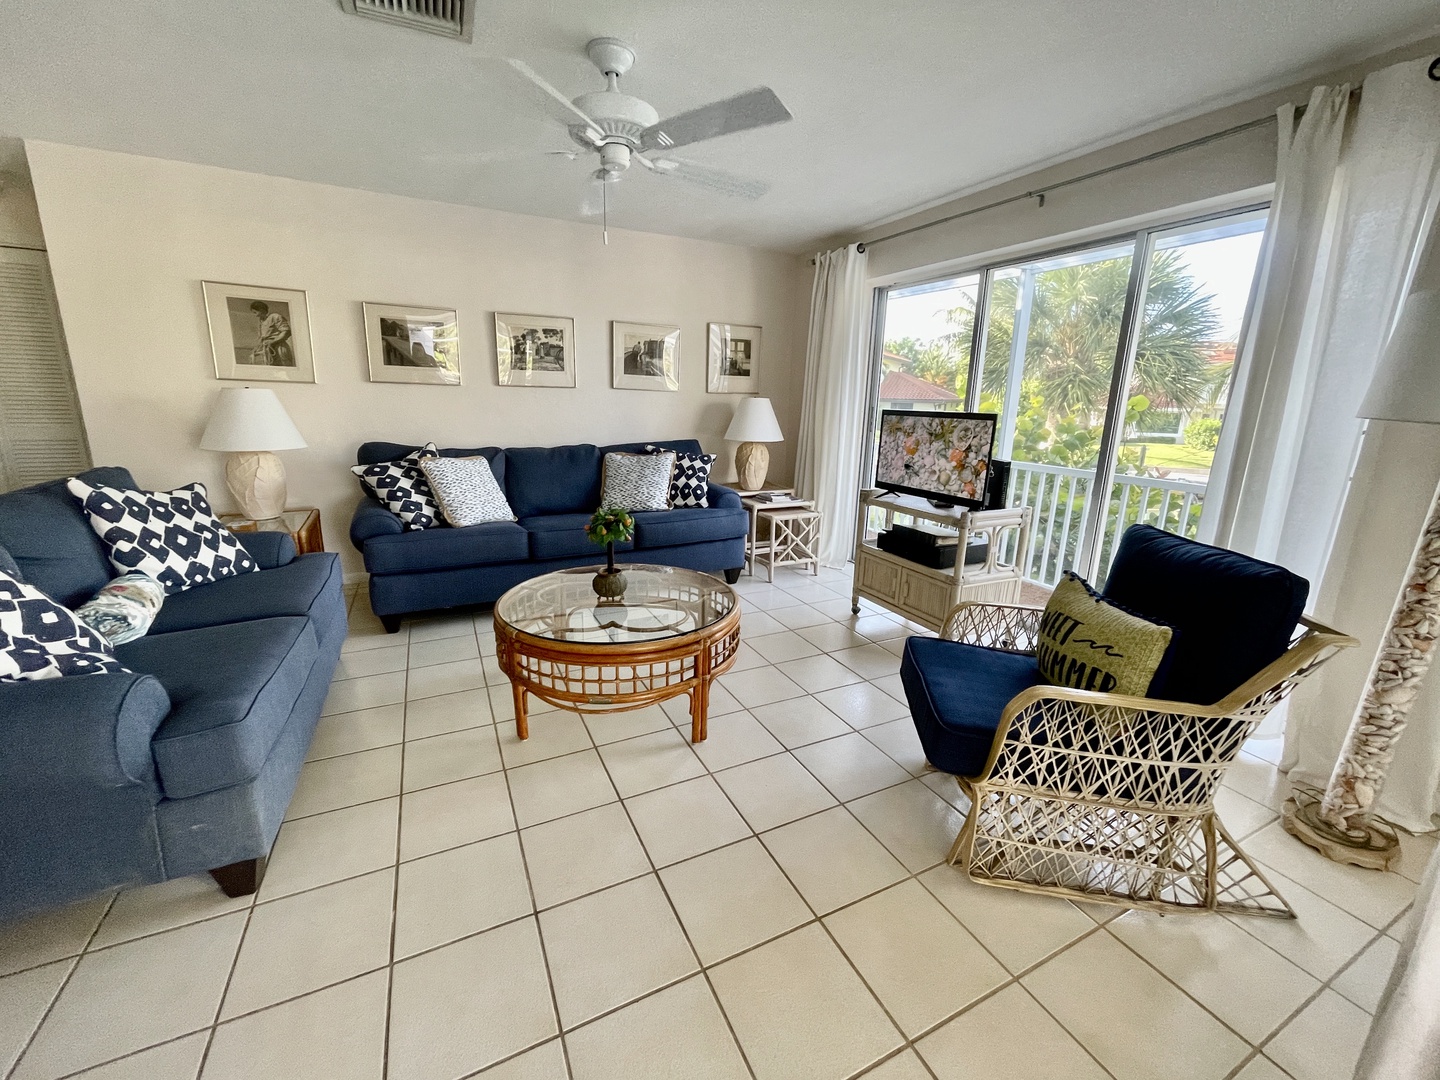 There is lanai access from 2 sides of the family room.